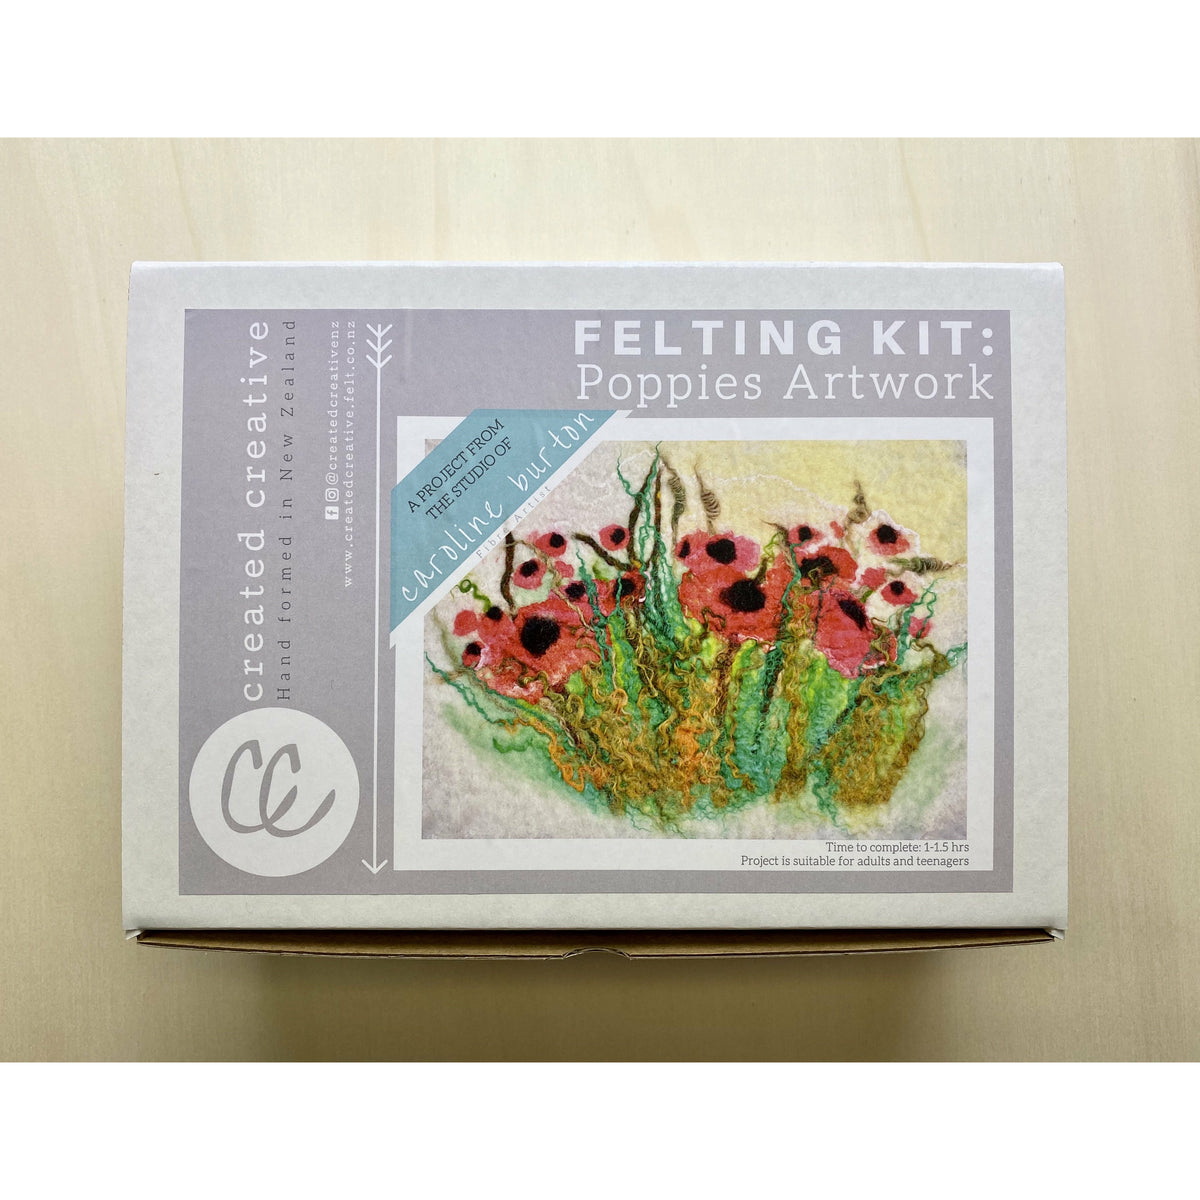 Wet Felting Kits By Created Creative - Punch Needle Supplies NZ